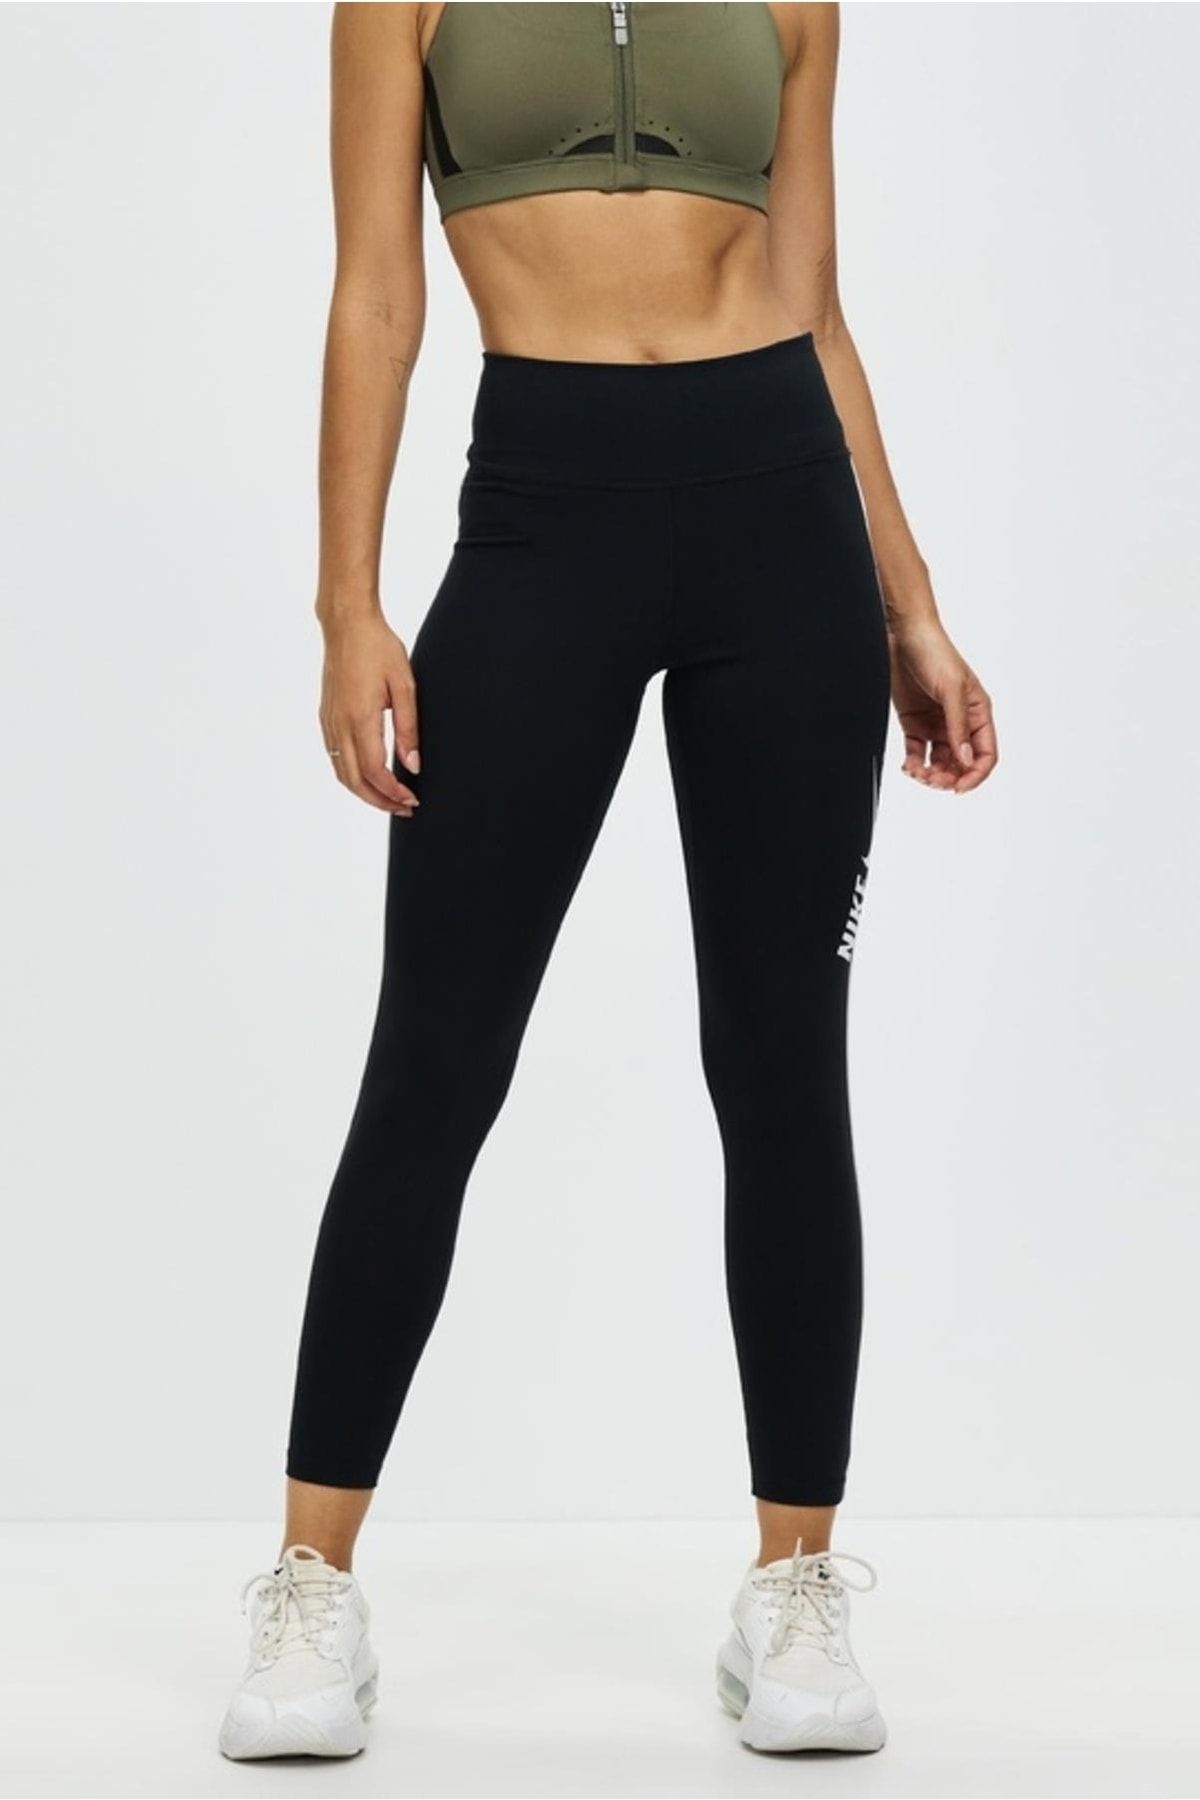 Nike One Normal Waisted 7/8 Graphic Black Women's Tights - Trendyol